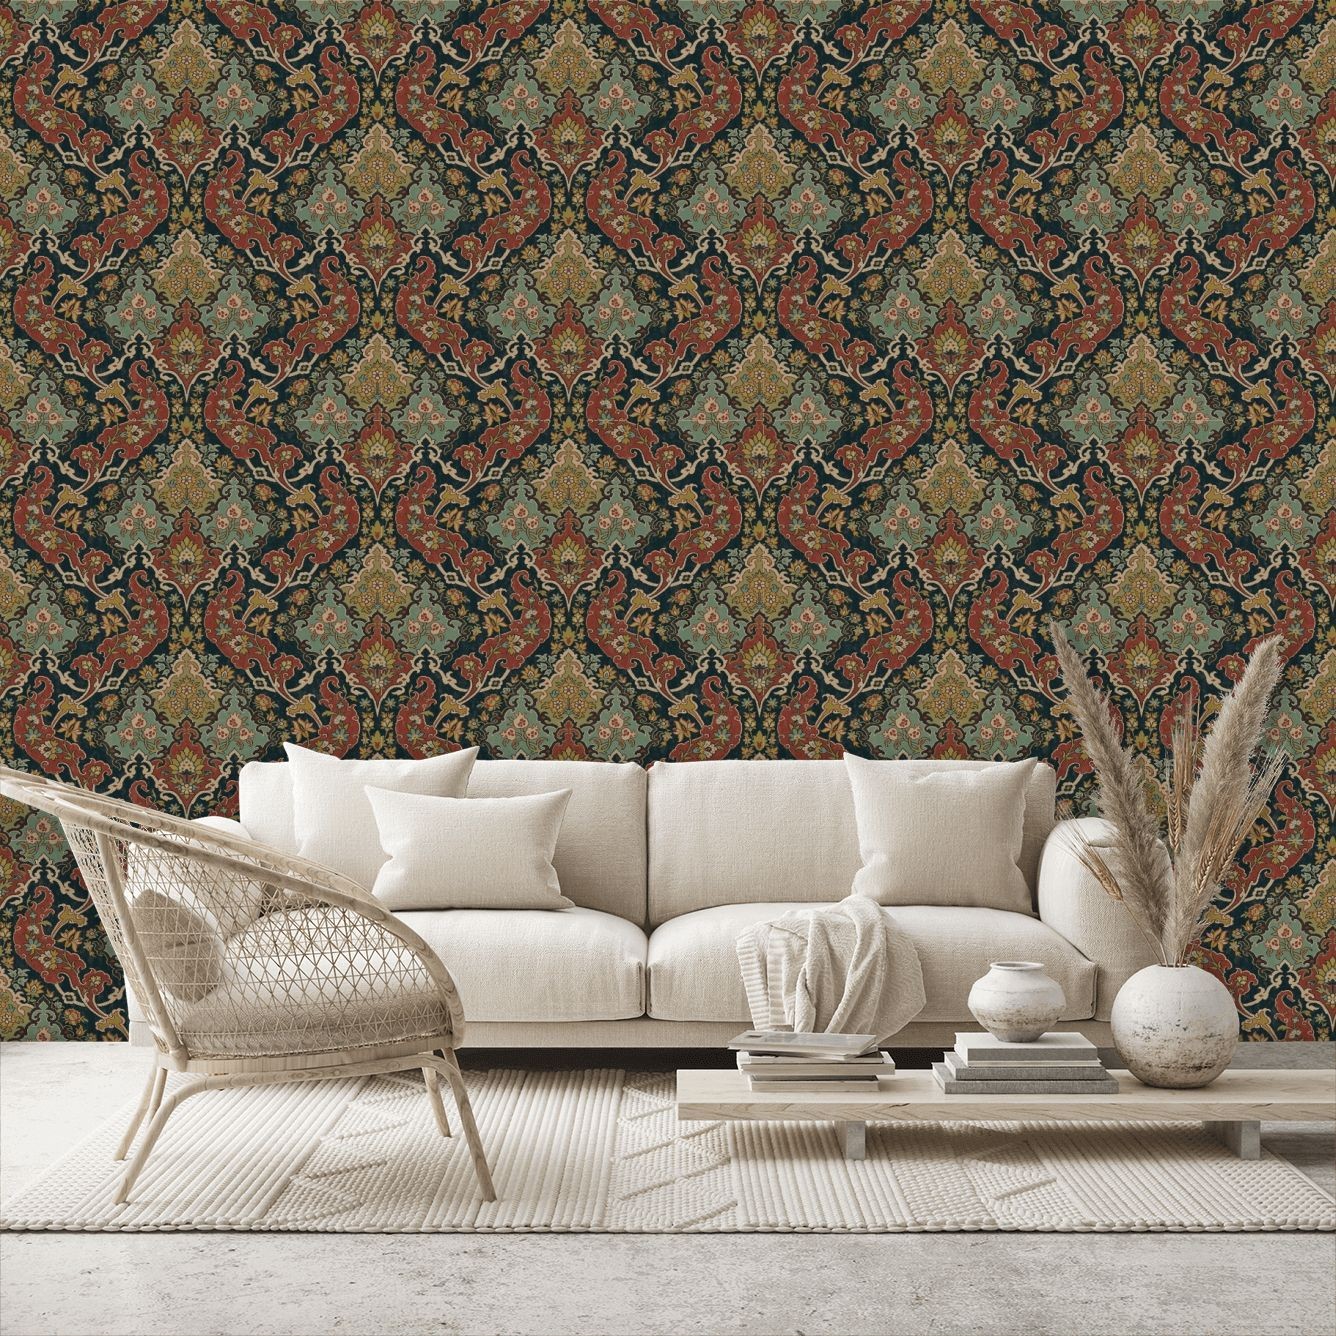 Pushkin Wallpaper - By Cole and Son - 108/8040